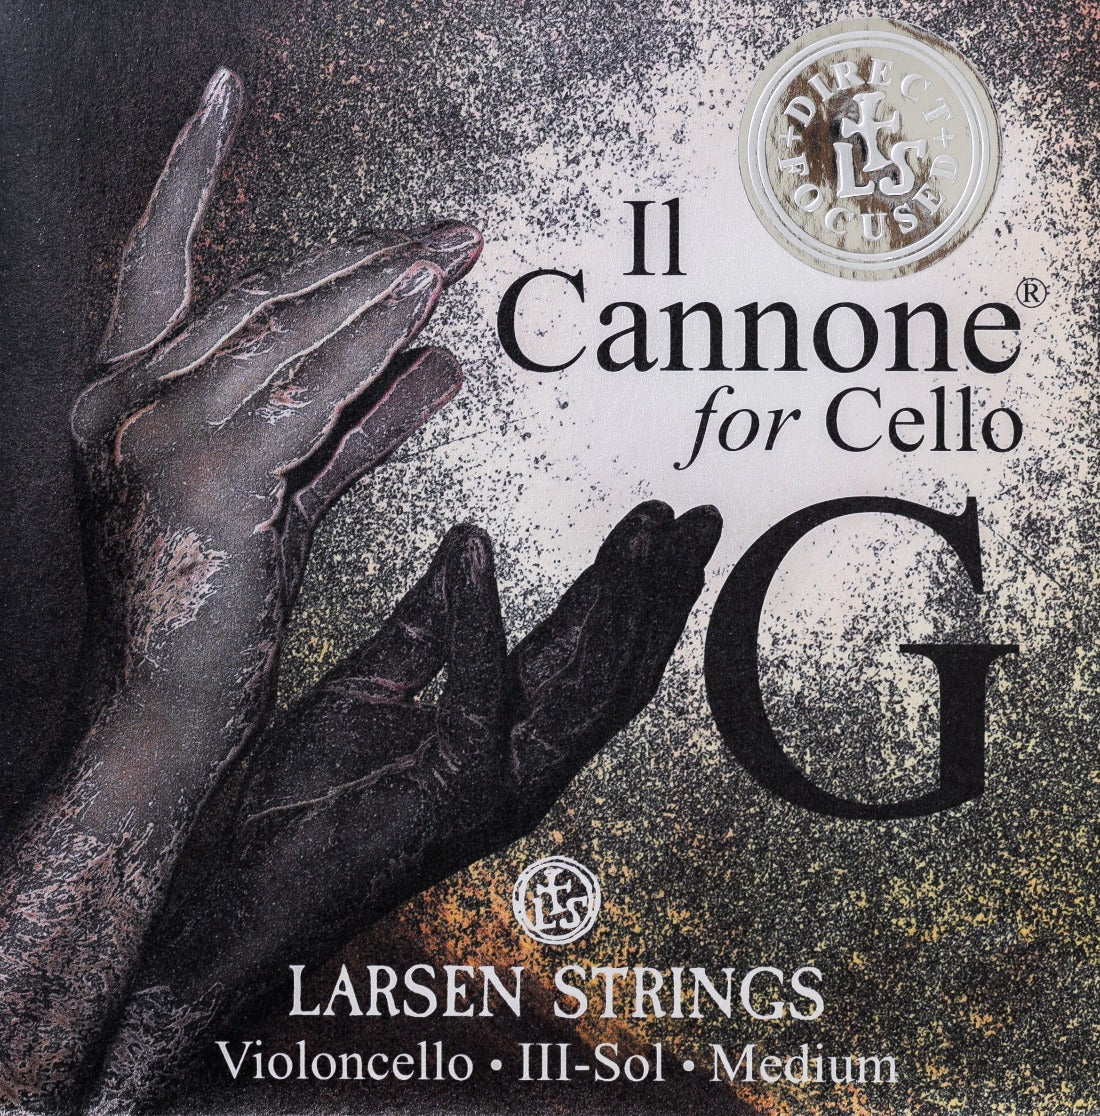 Larsen Il Cannone Cello G string Direct and Focused